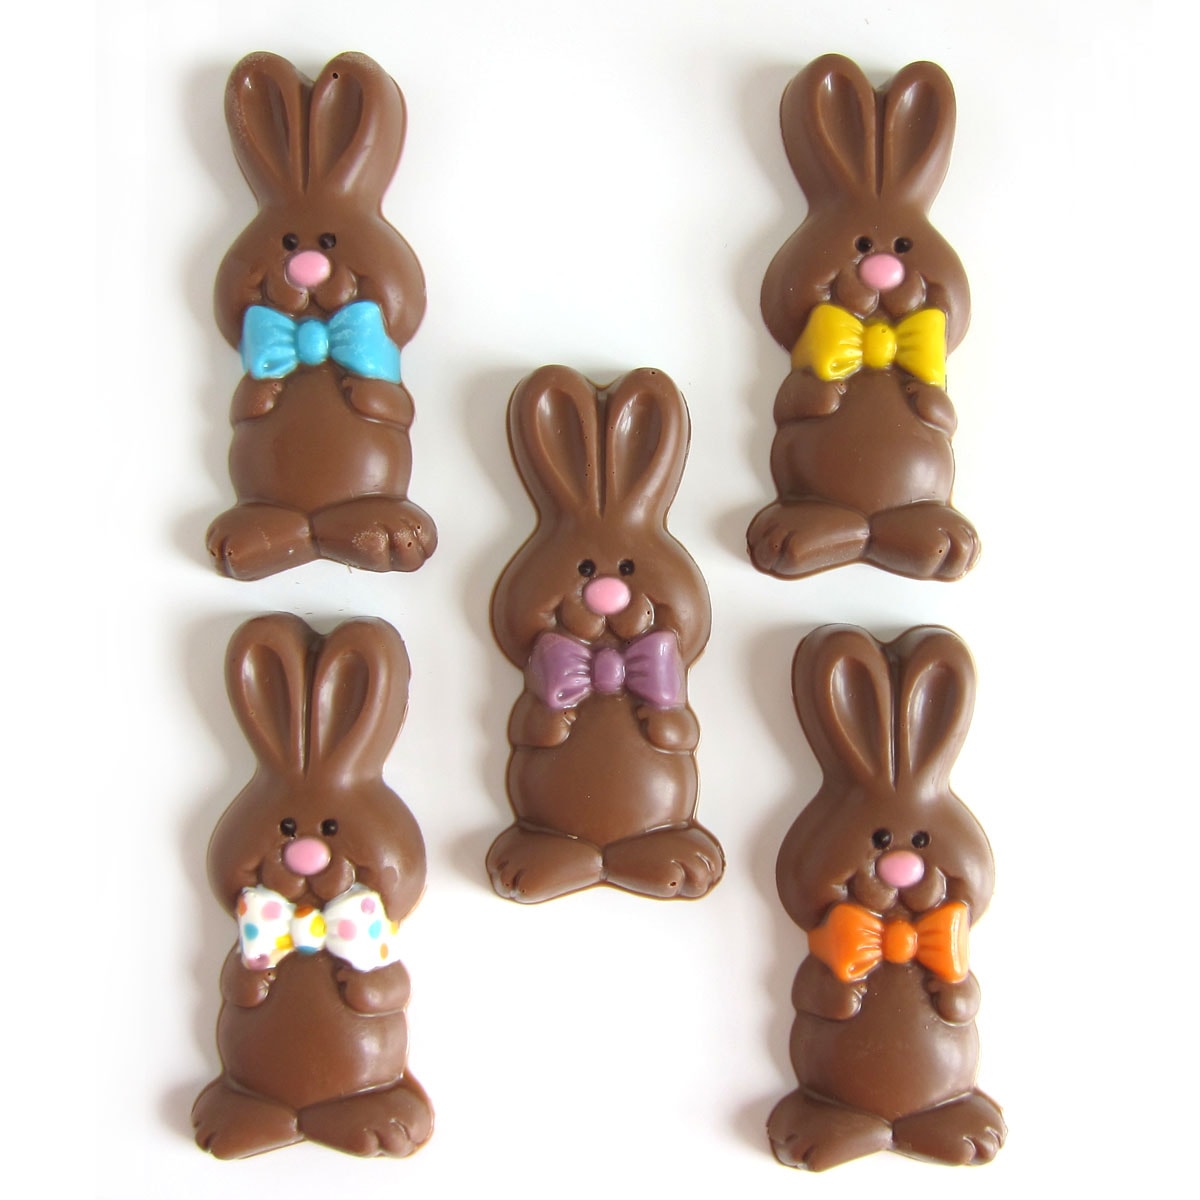 chocolate Easter bunnies with colorful bow ties